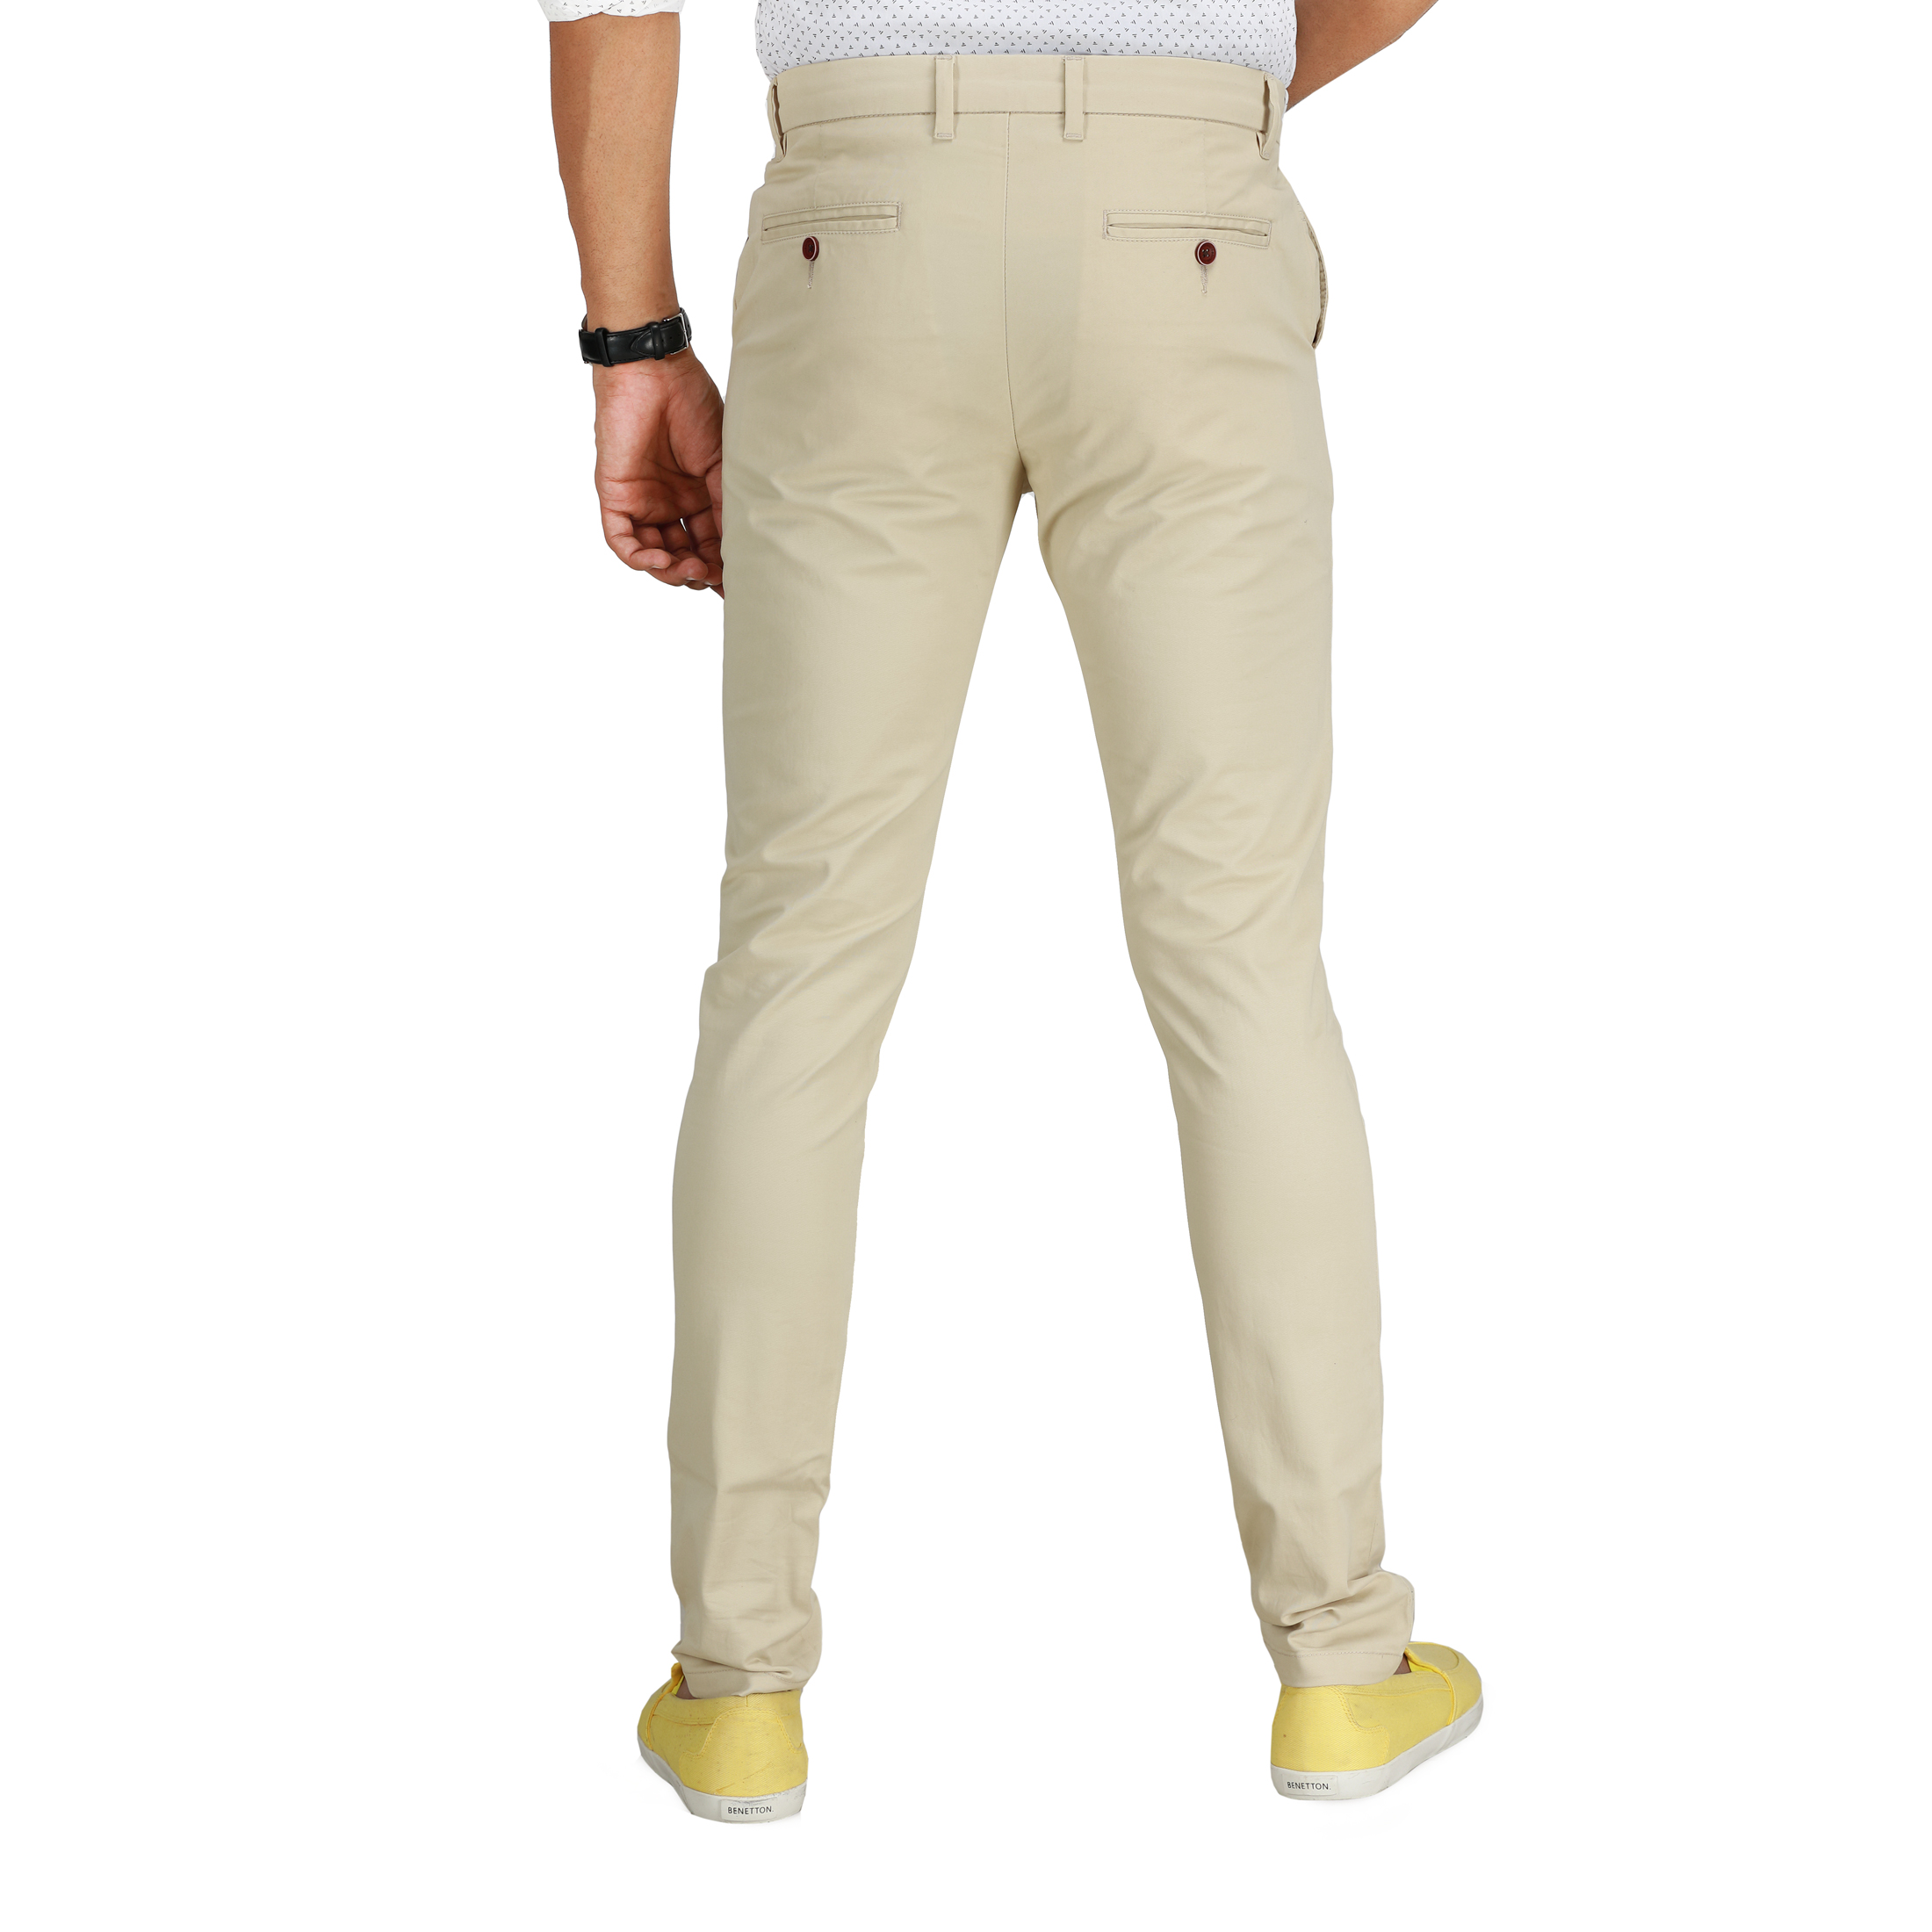 Buy Pale Sandy Fawn Chinos Online @ ₹1699 from ShopClues